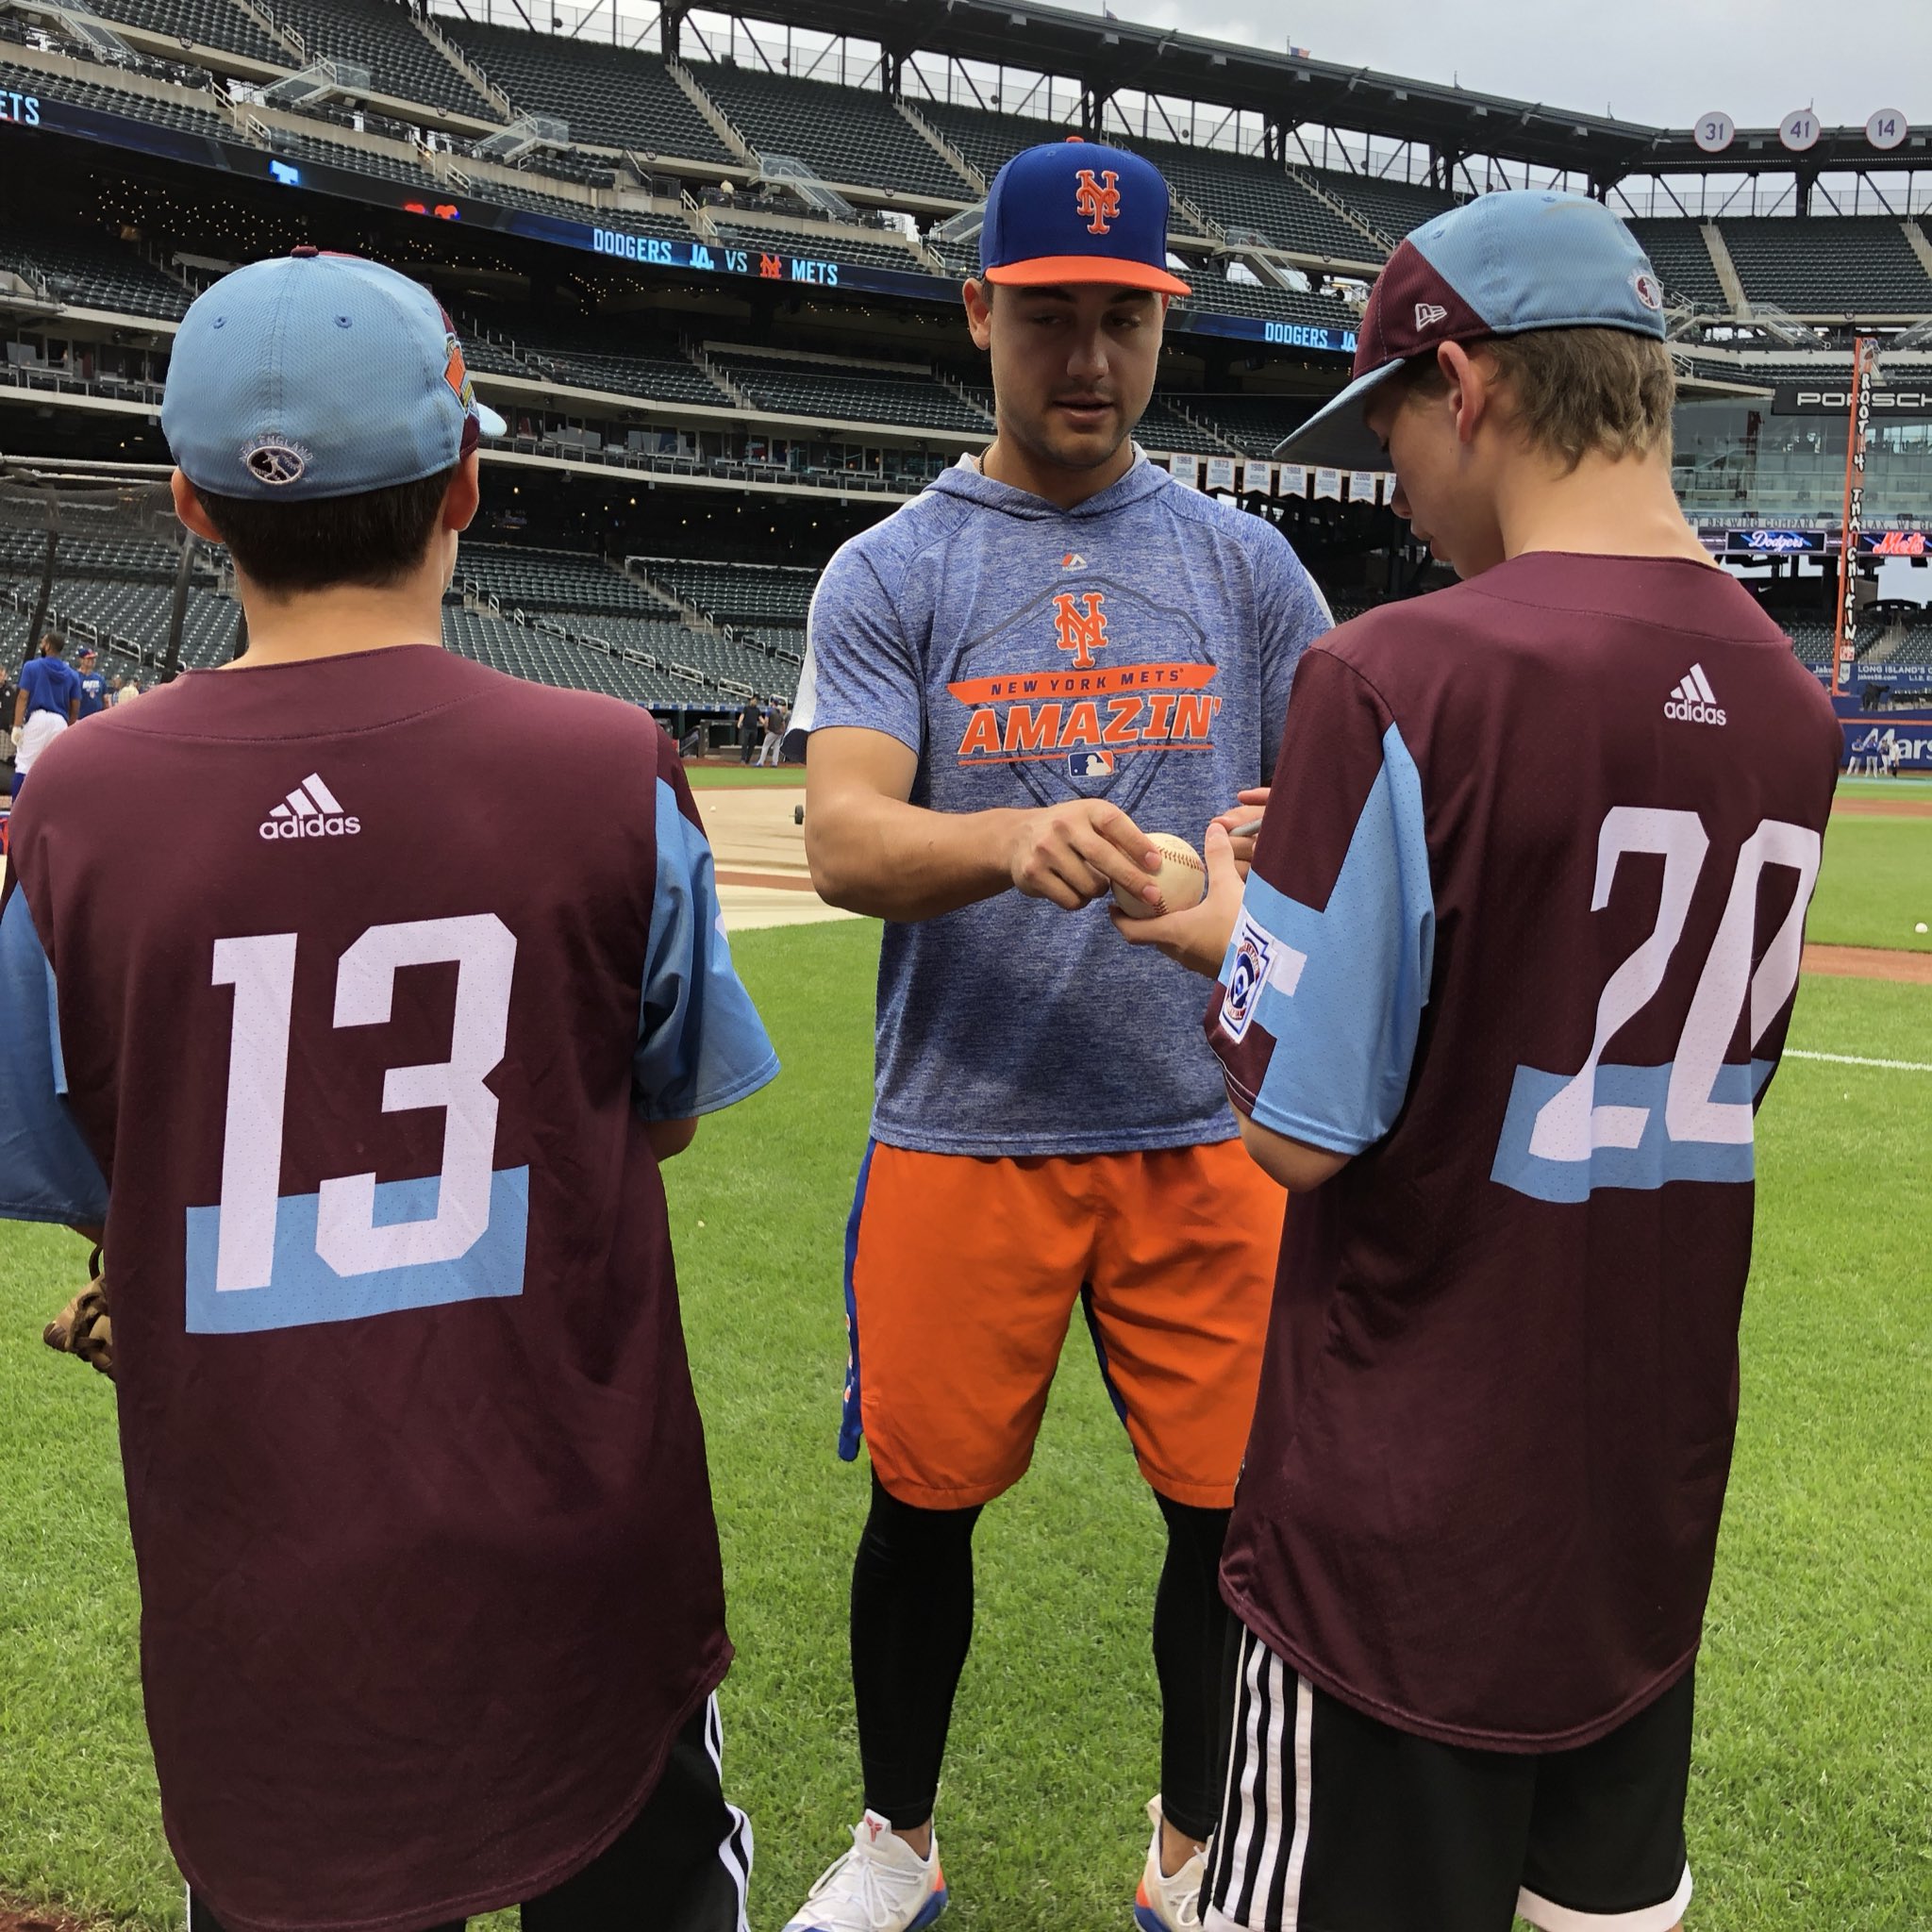 New York Mets on Twitter "Big league dreaming! The Rhode Island LLWS